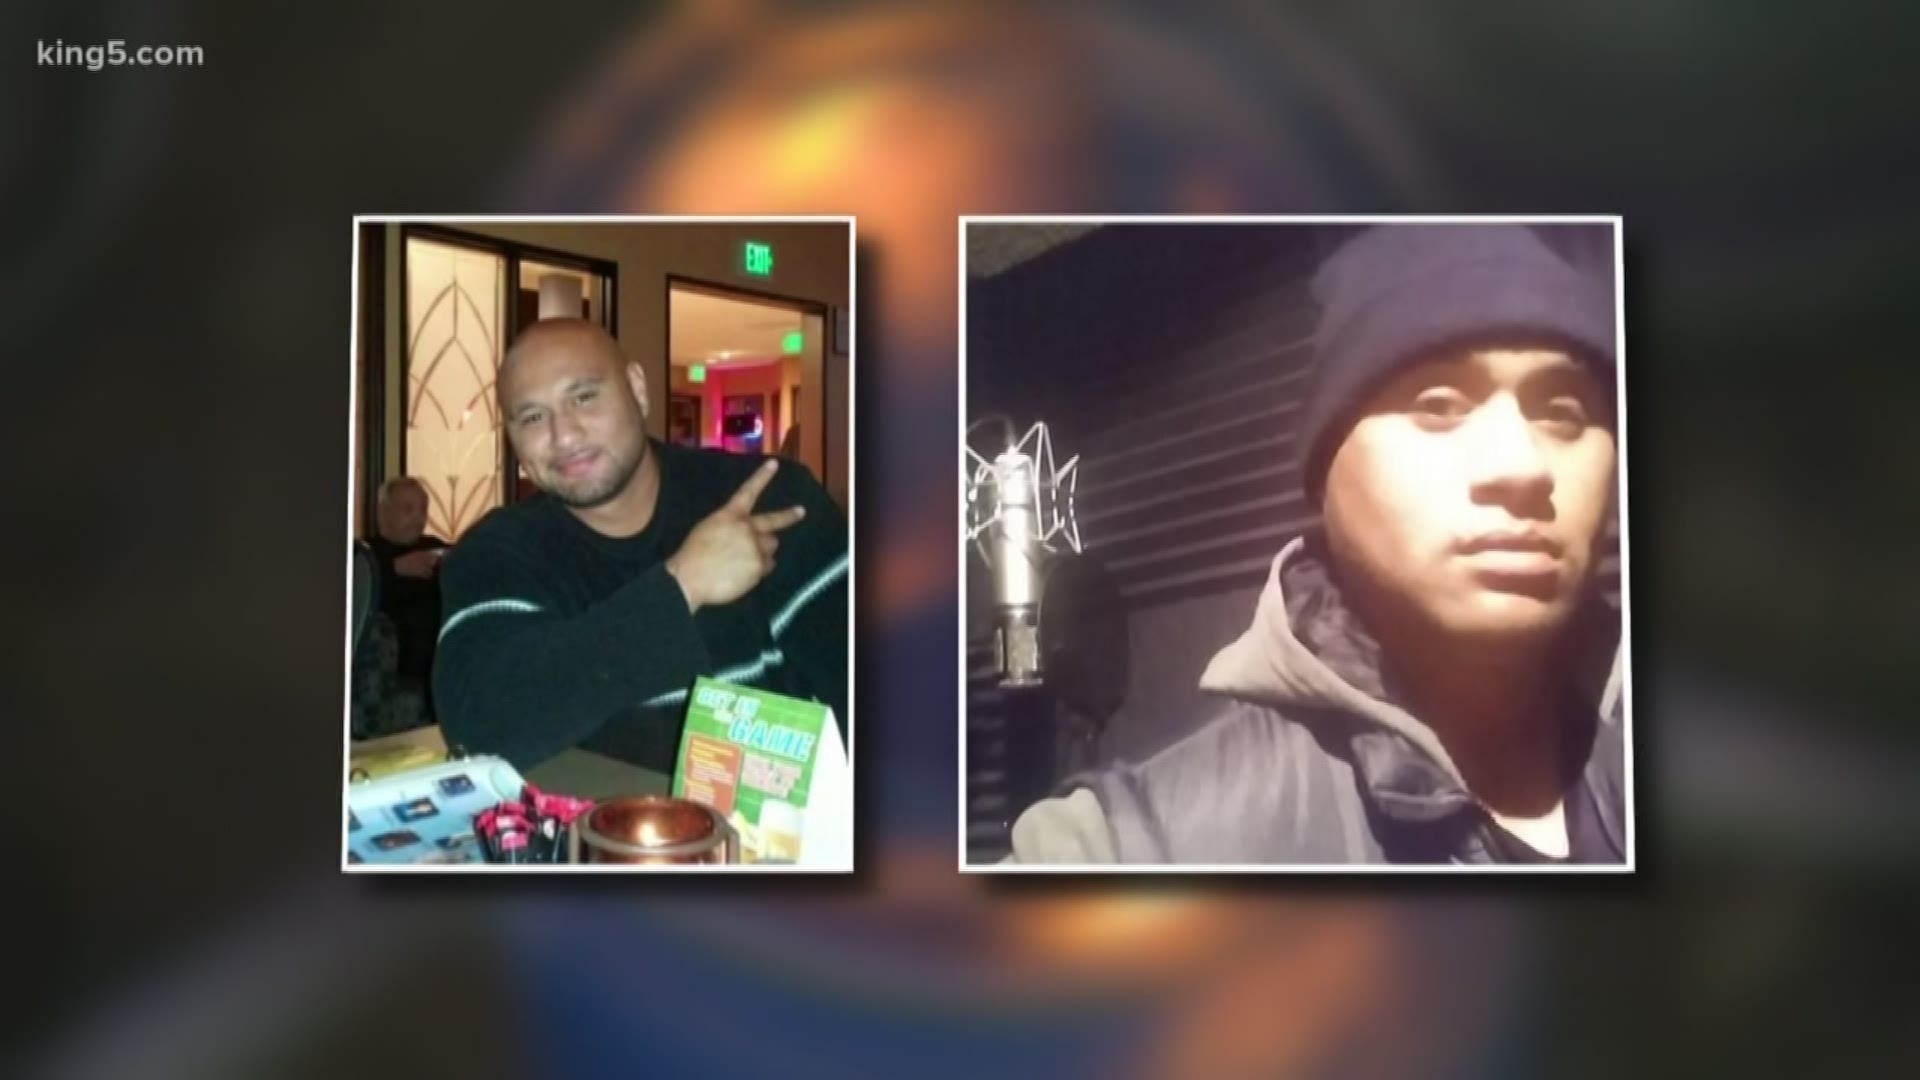 The Seattle Police Department released body camera footage of a deadly officer-involved shooting in Licton Springs on New Year's Eve. KING 5's Natalie Swaby reports: